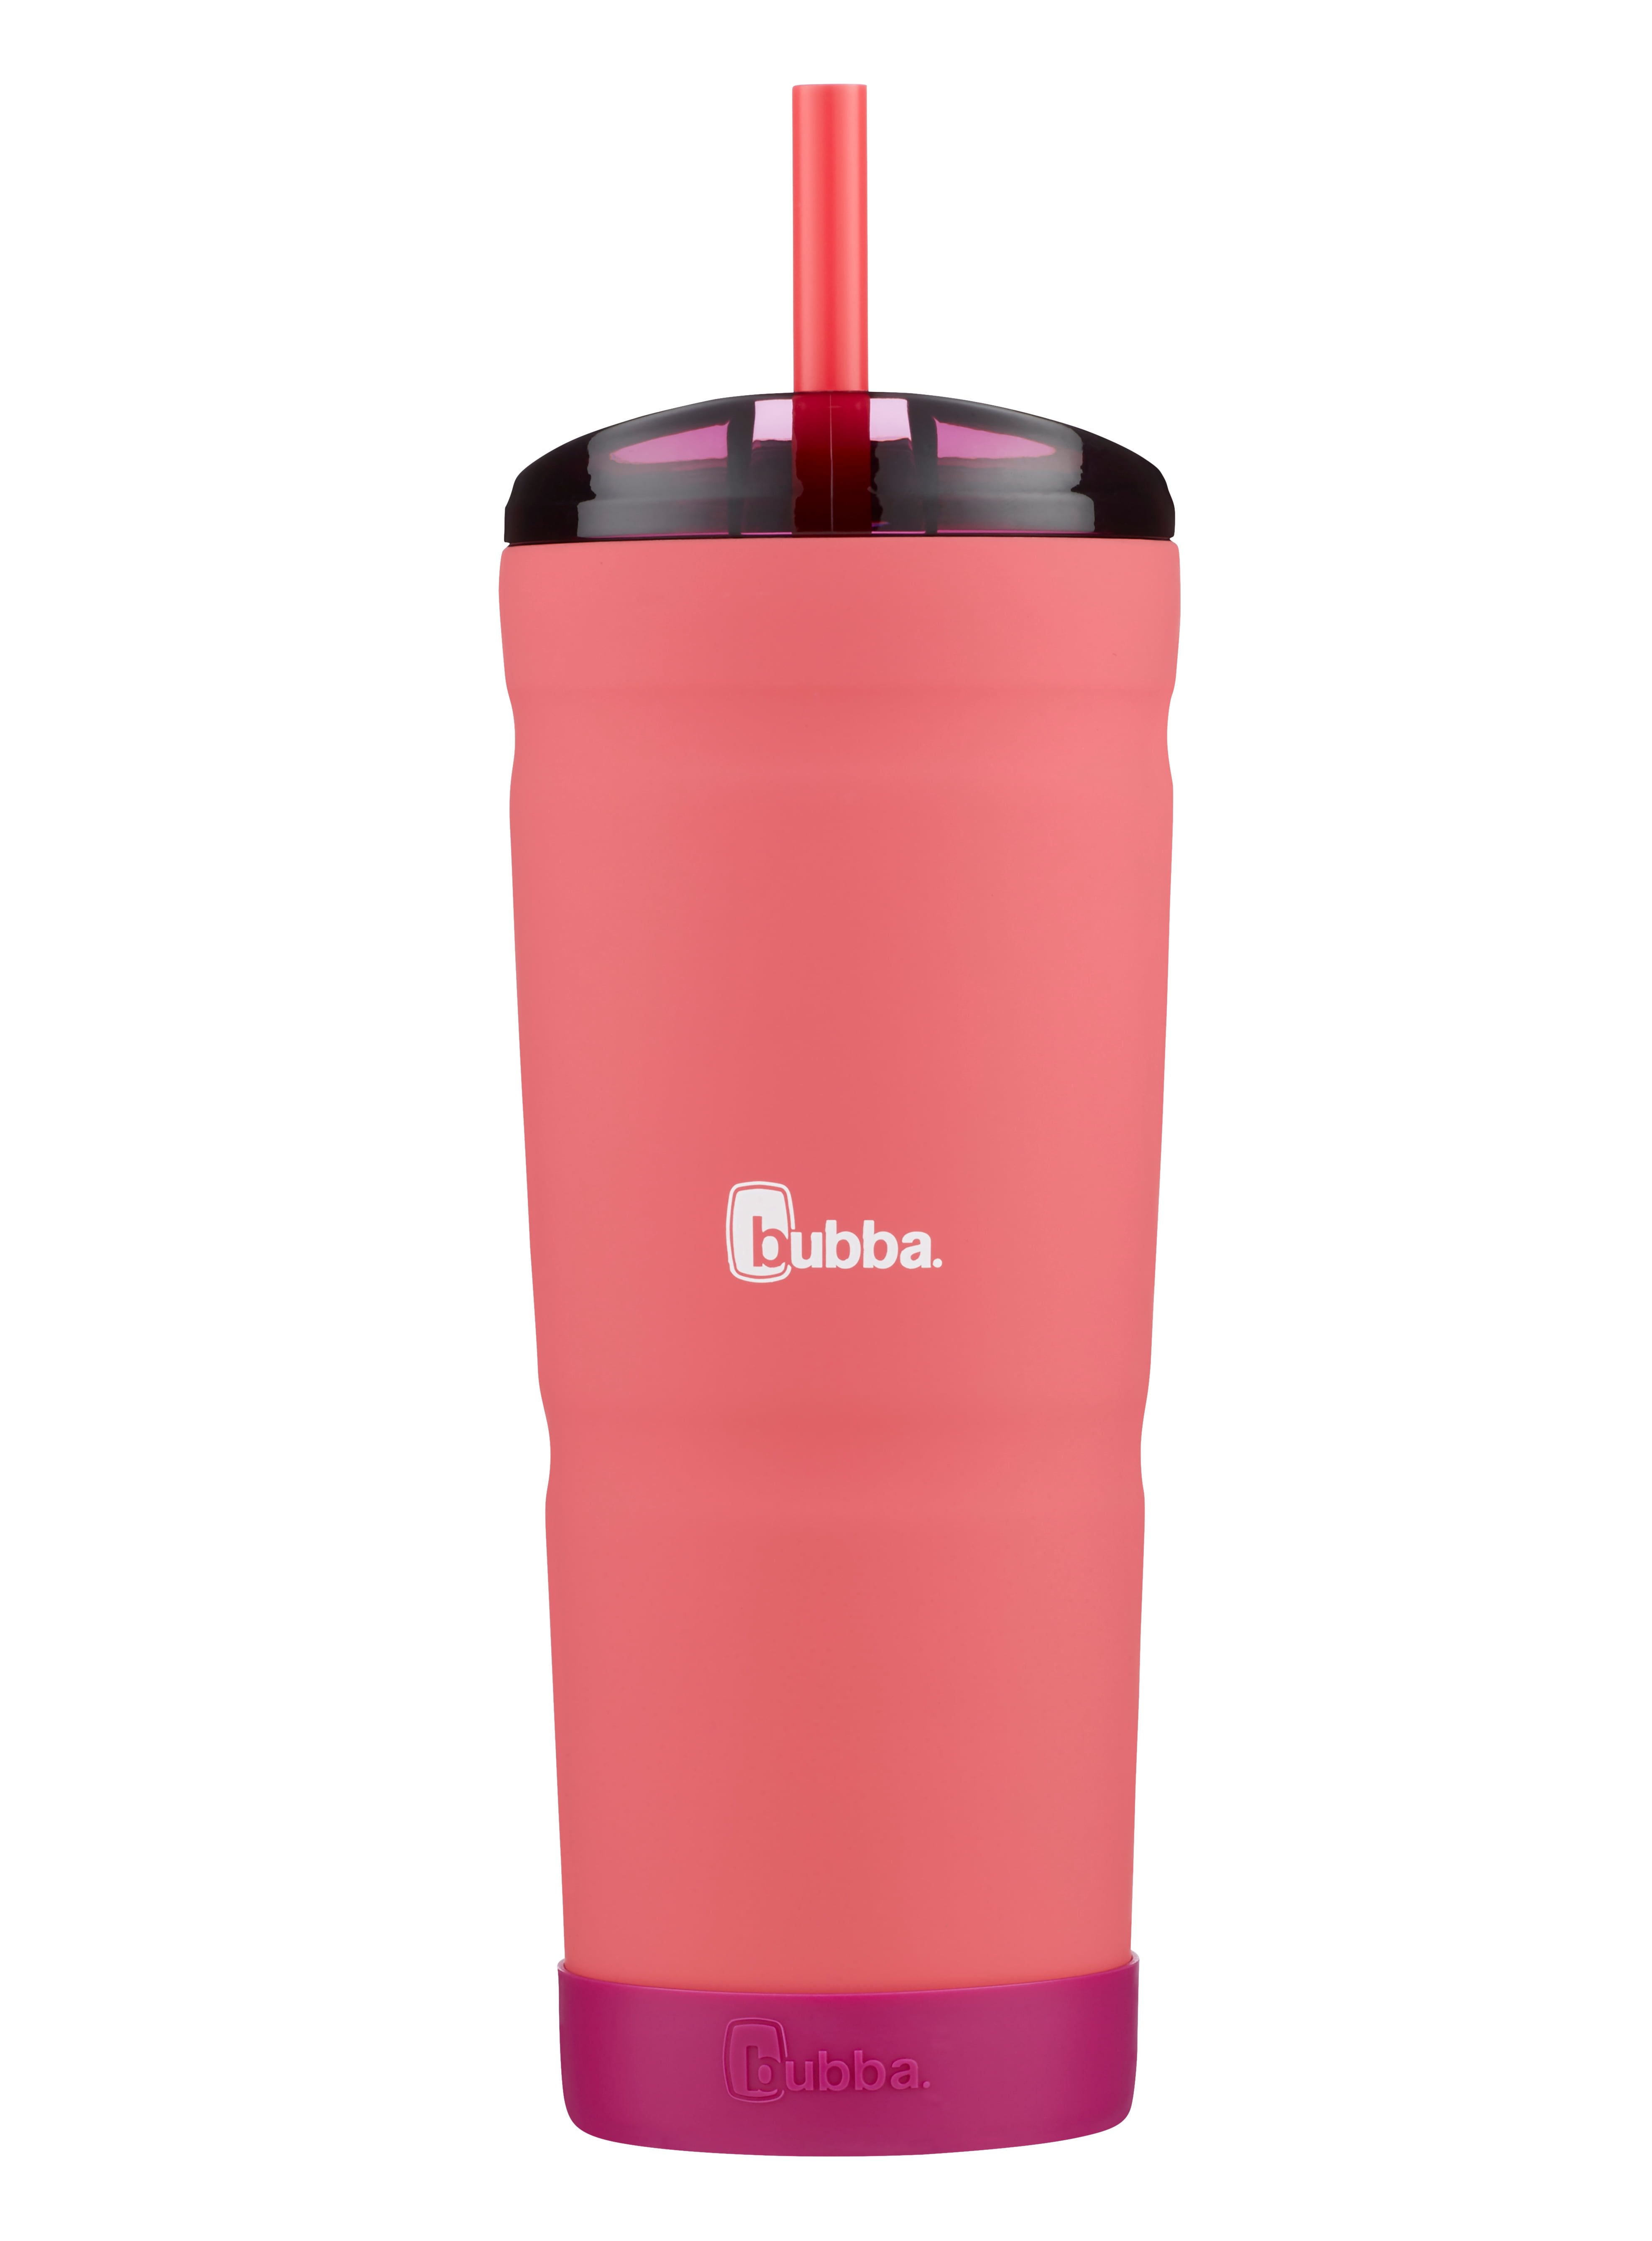 bubba Envy S Stainless Steel Tumbler with Straw and Bumper, Pink, 24 fl oz.